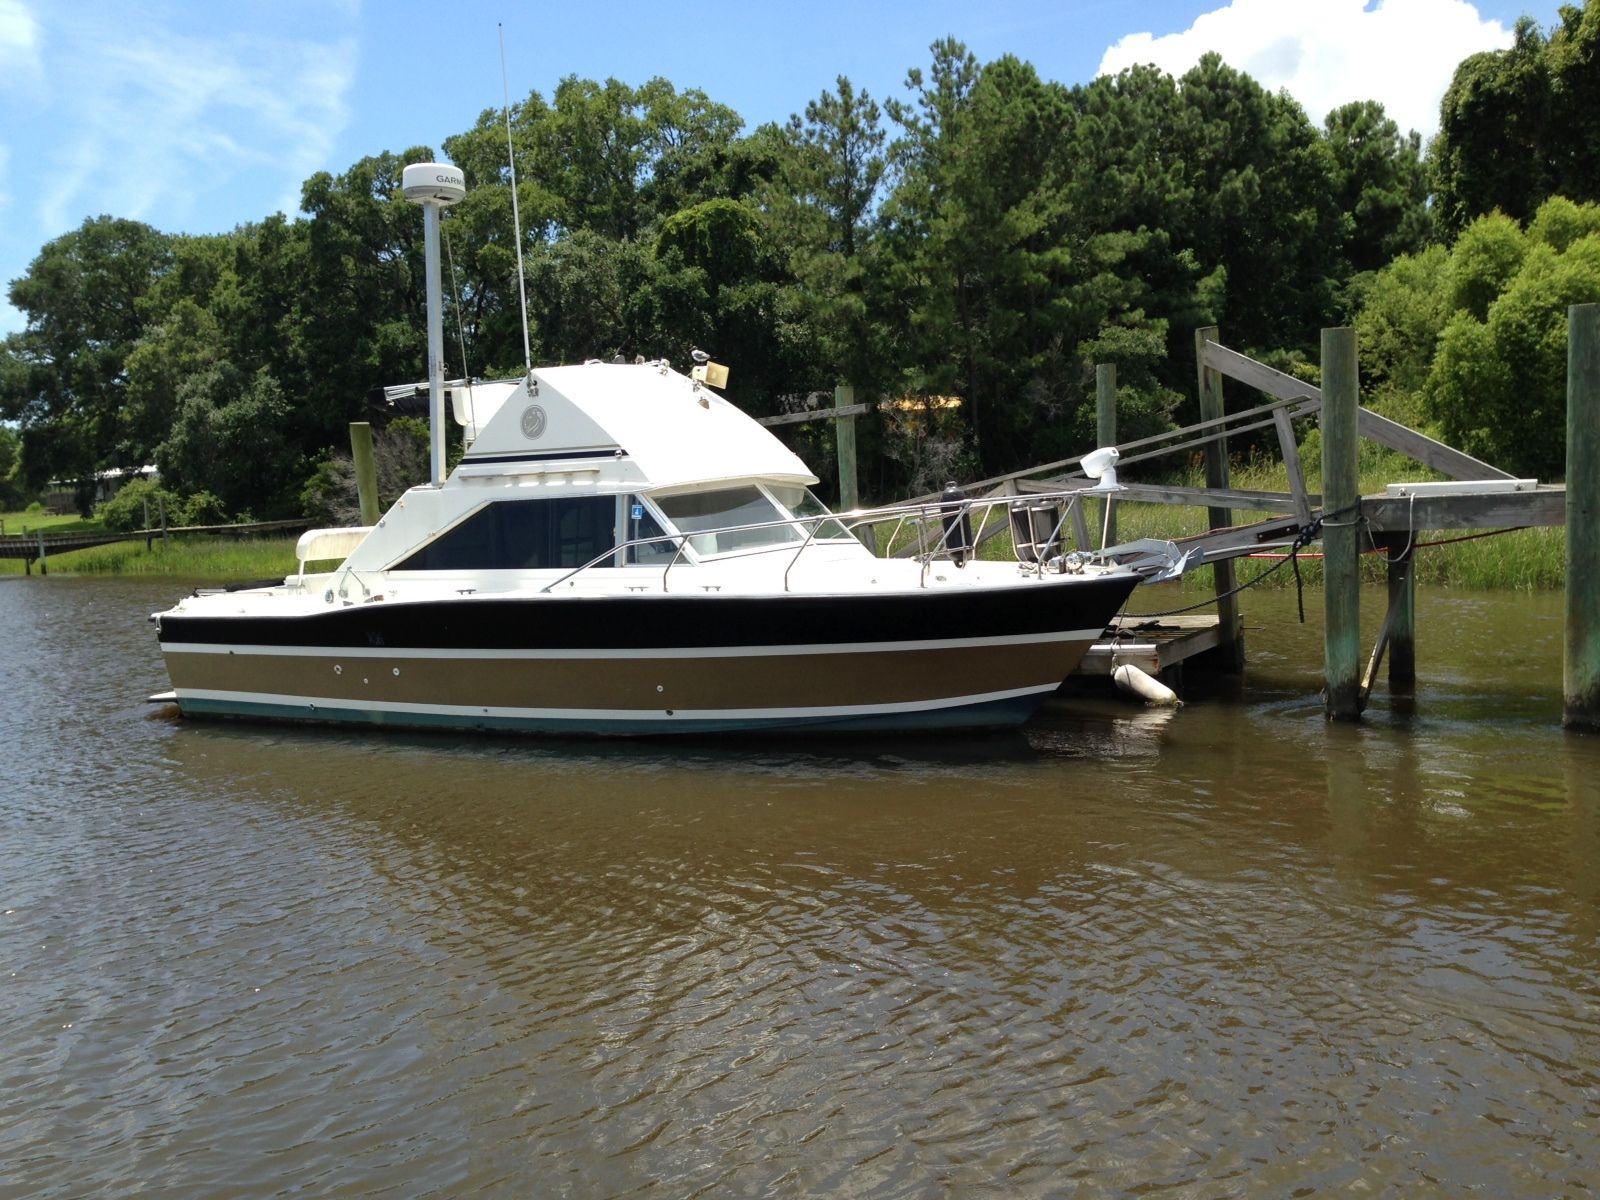 Chris Craft Commander 1978 for sale for $32,000 - Boats 